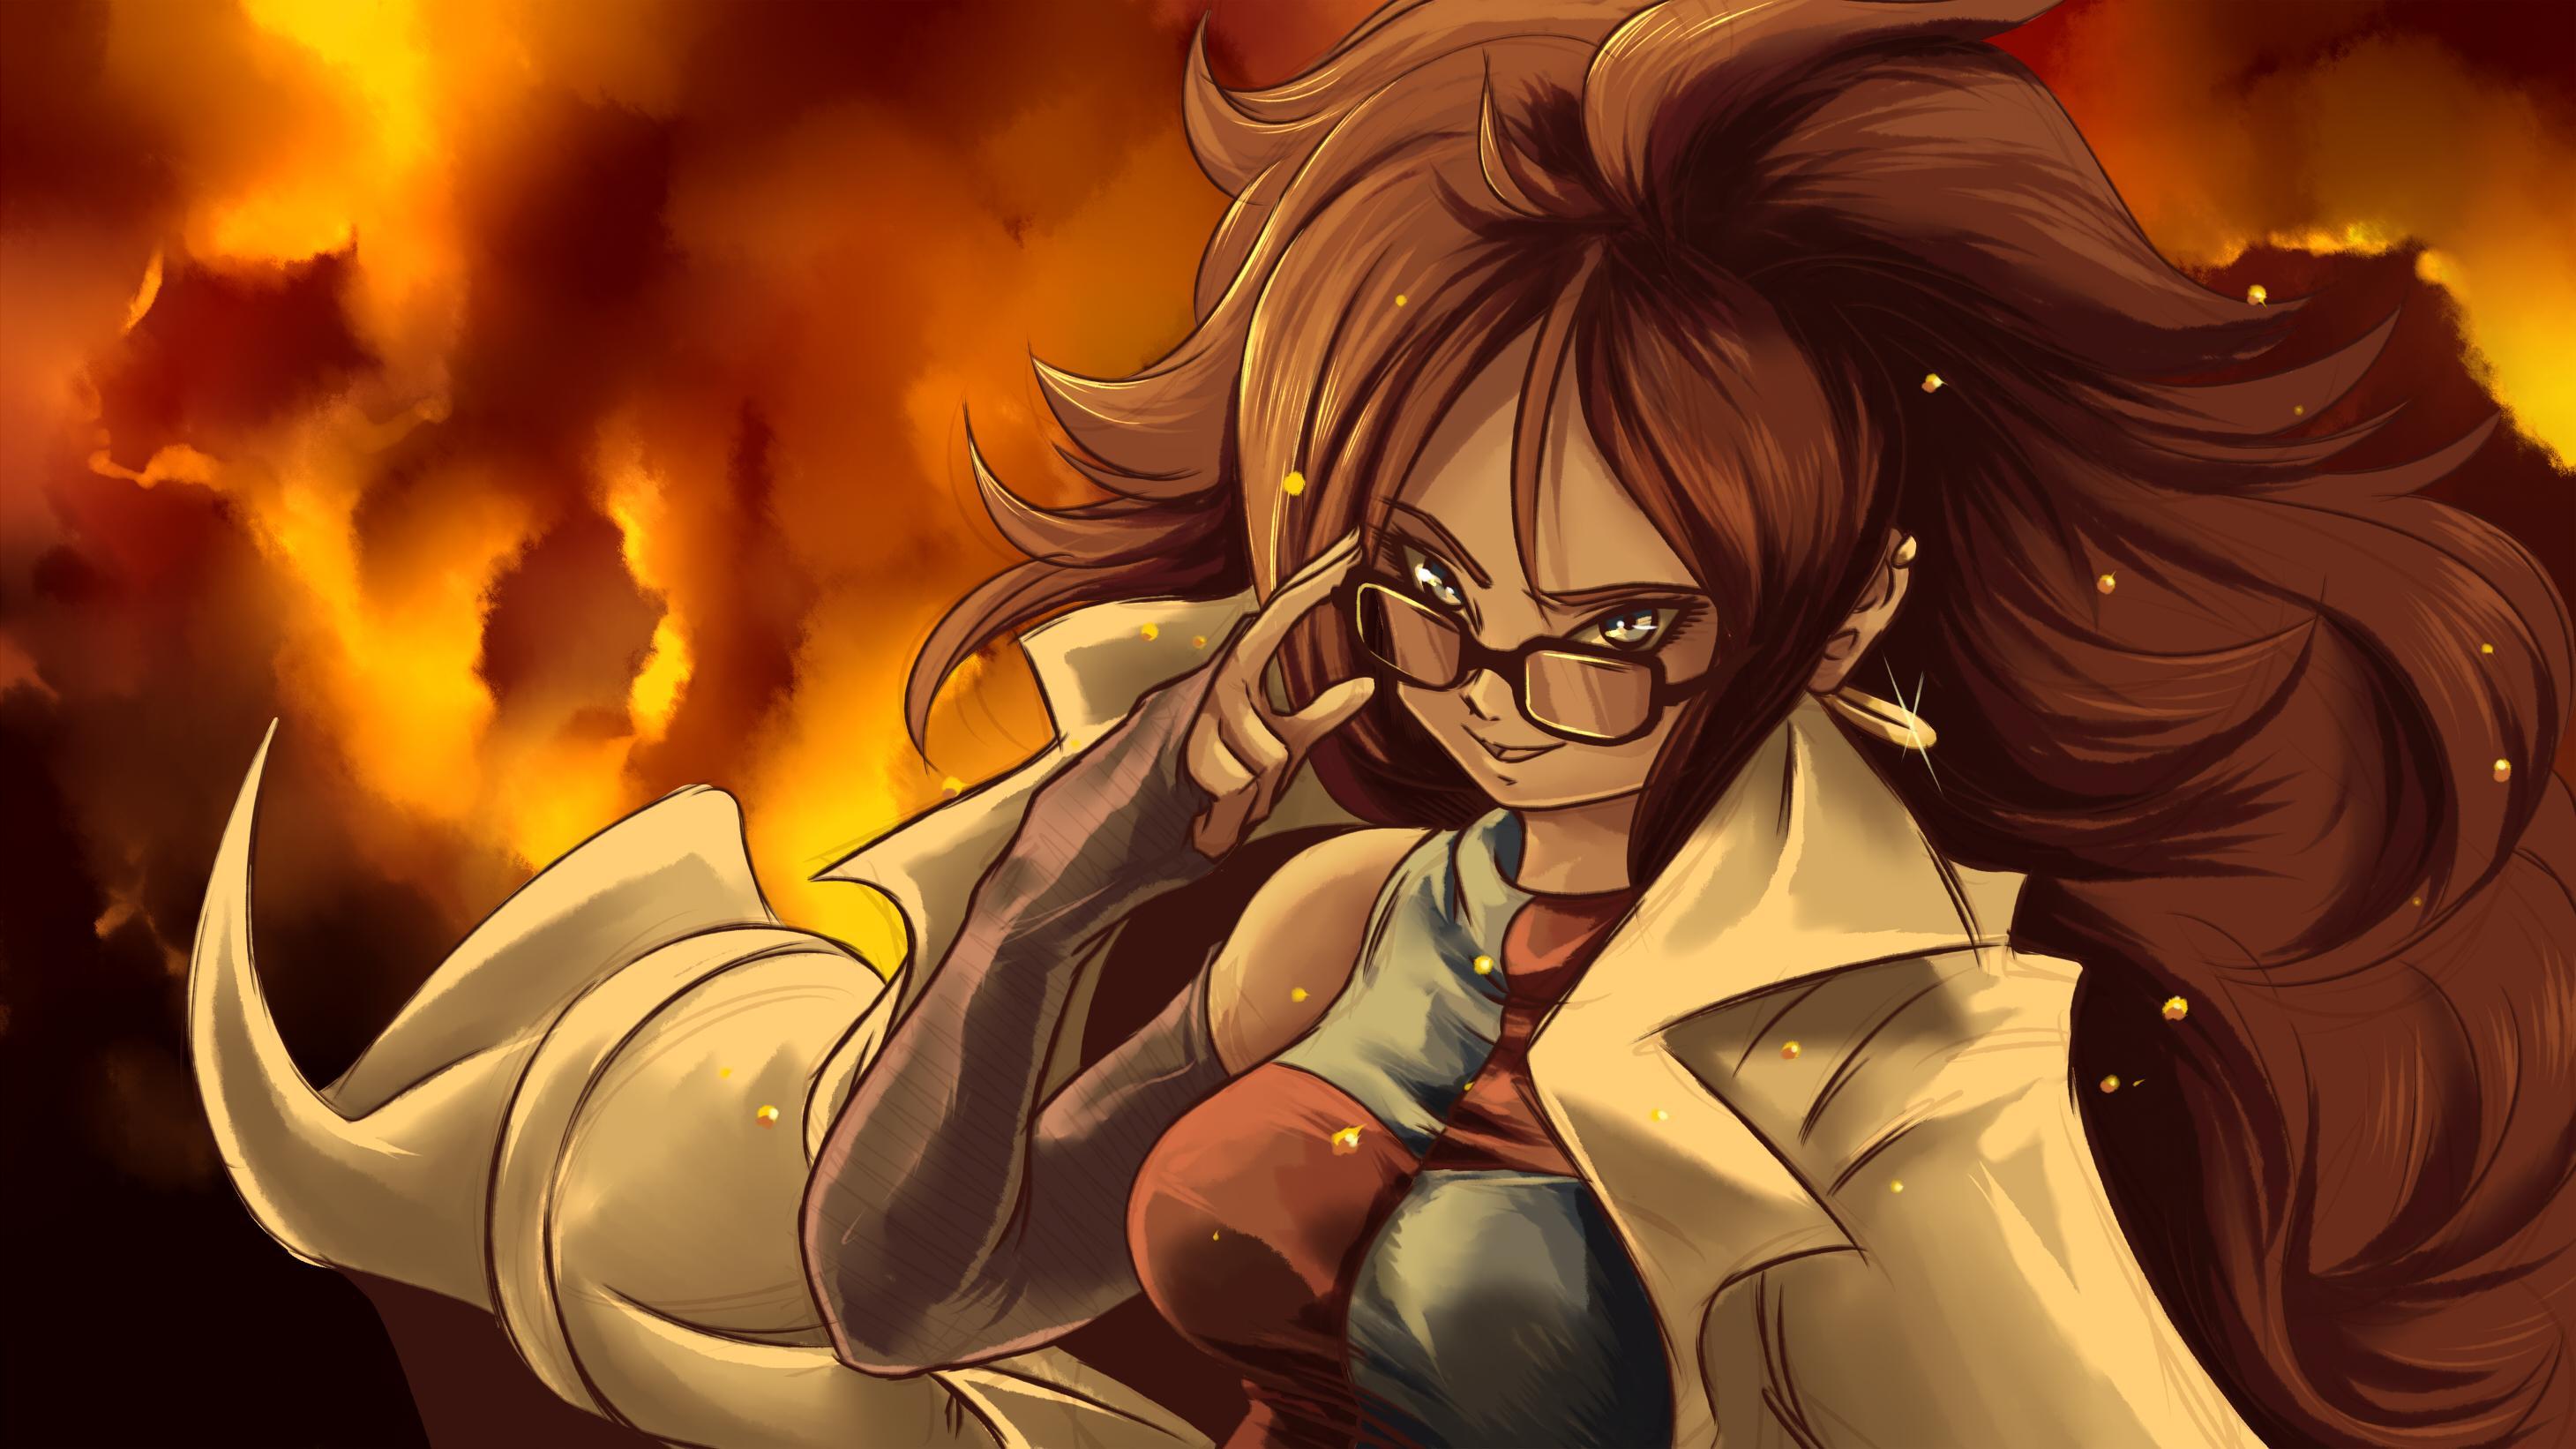 Android 21 Dragon Ball Fighterz, HD Games, 4k Wallpaper